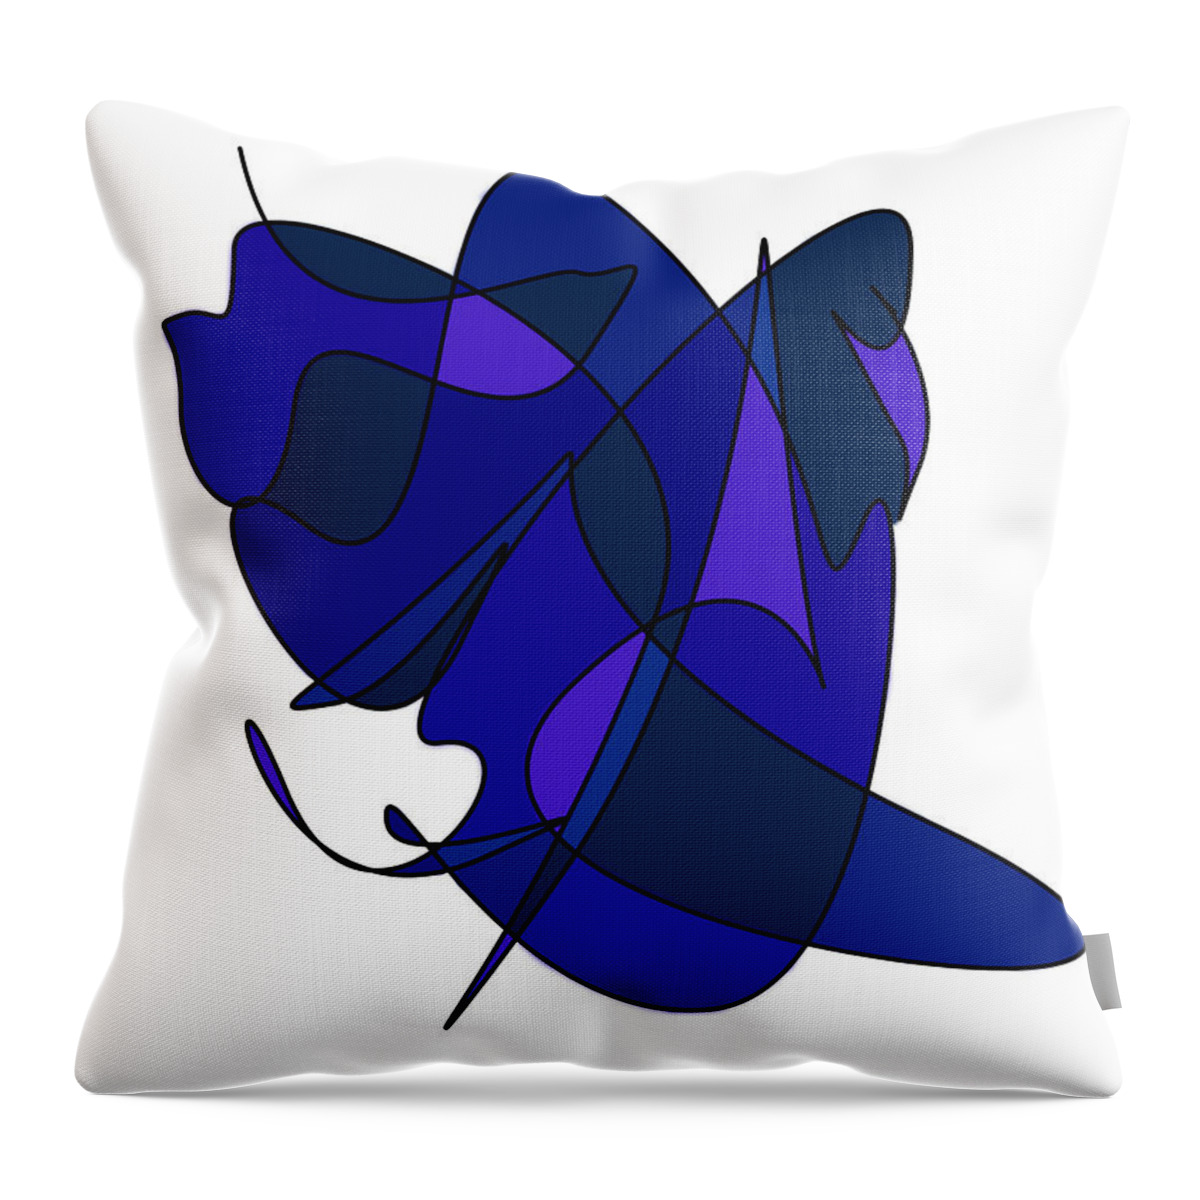 Abstract Throw Pillow featuring the digital art Abstract Lines And Curves In Blue by Kirt Tisdale